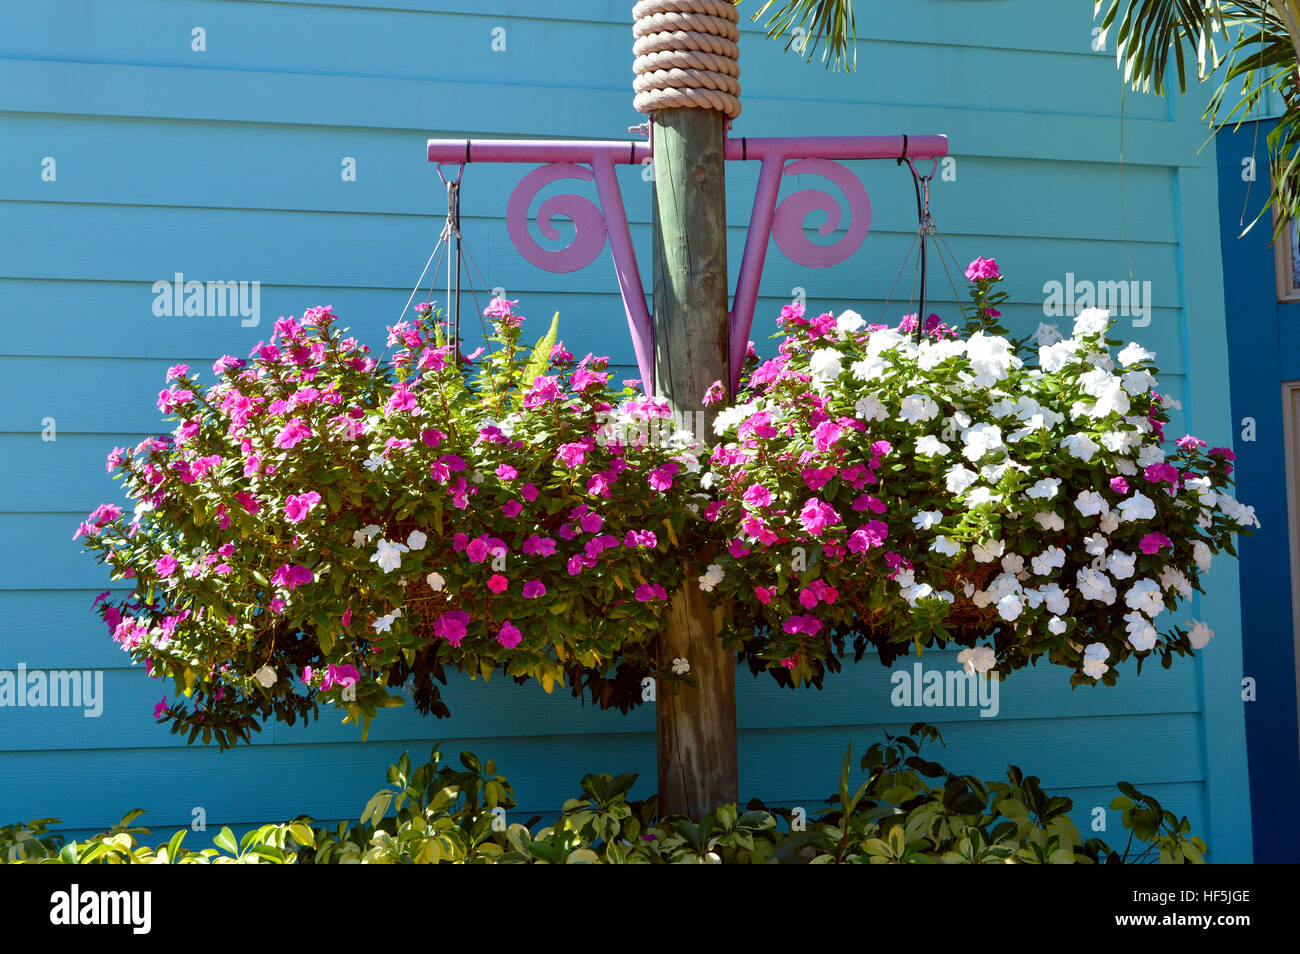 Busy lizzie Botanical name Impatiens flowers in hanging baskets Stock Photo